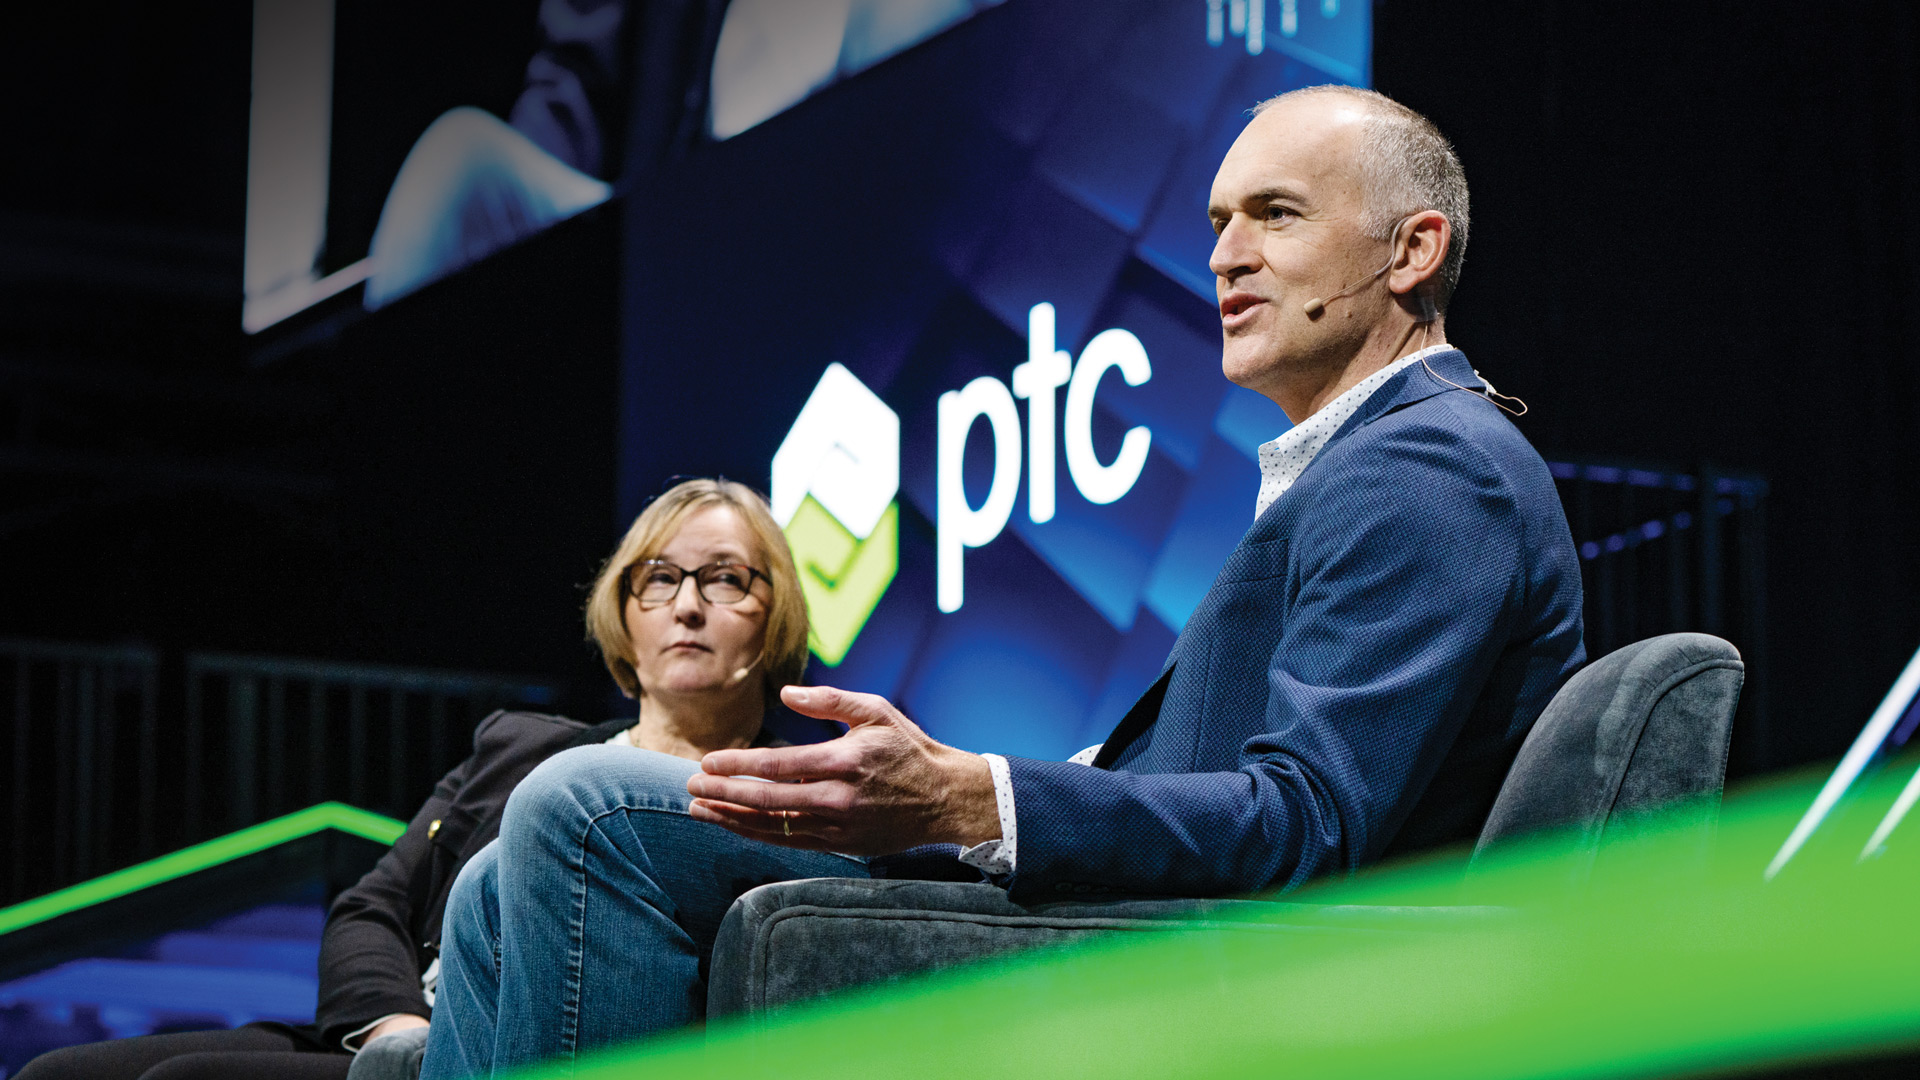 PTC’s Vice President of Sustainability Dave Duncan (right) speaking in May 2023 at LiveWorx, PTC’s annual tech event focused on digital transformation.